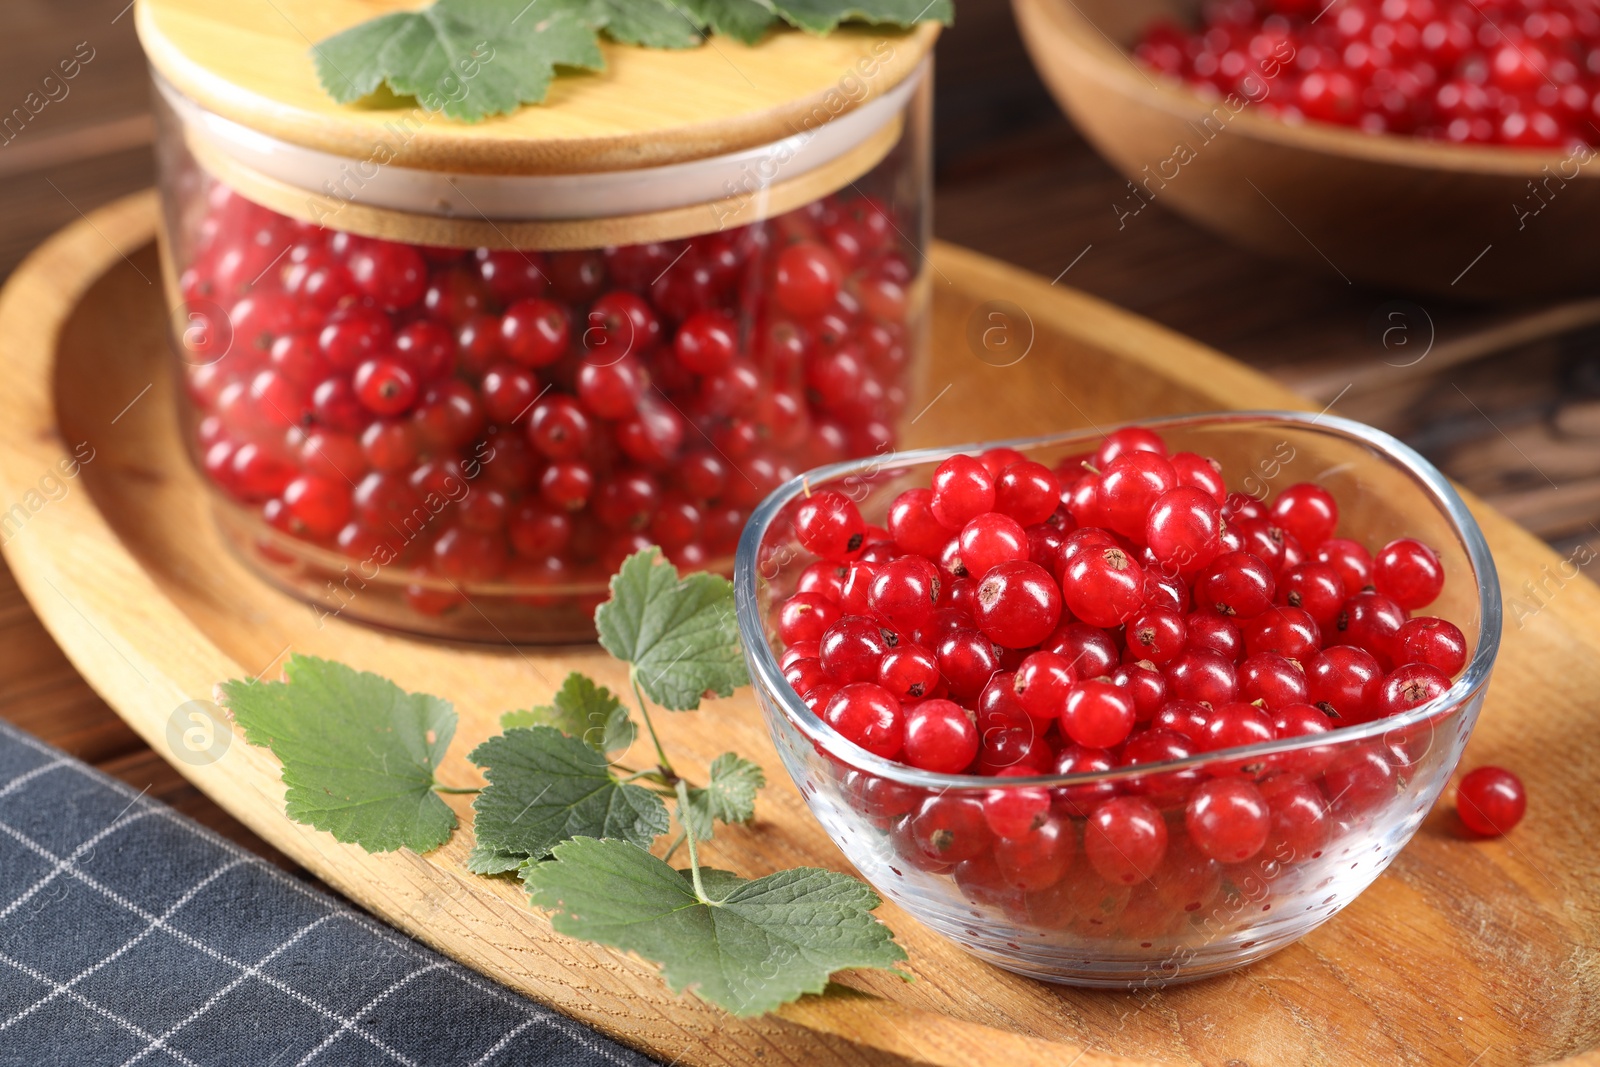 Photo of Ripe red currants and leaves on wooden table, closeup